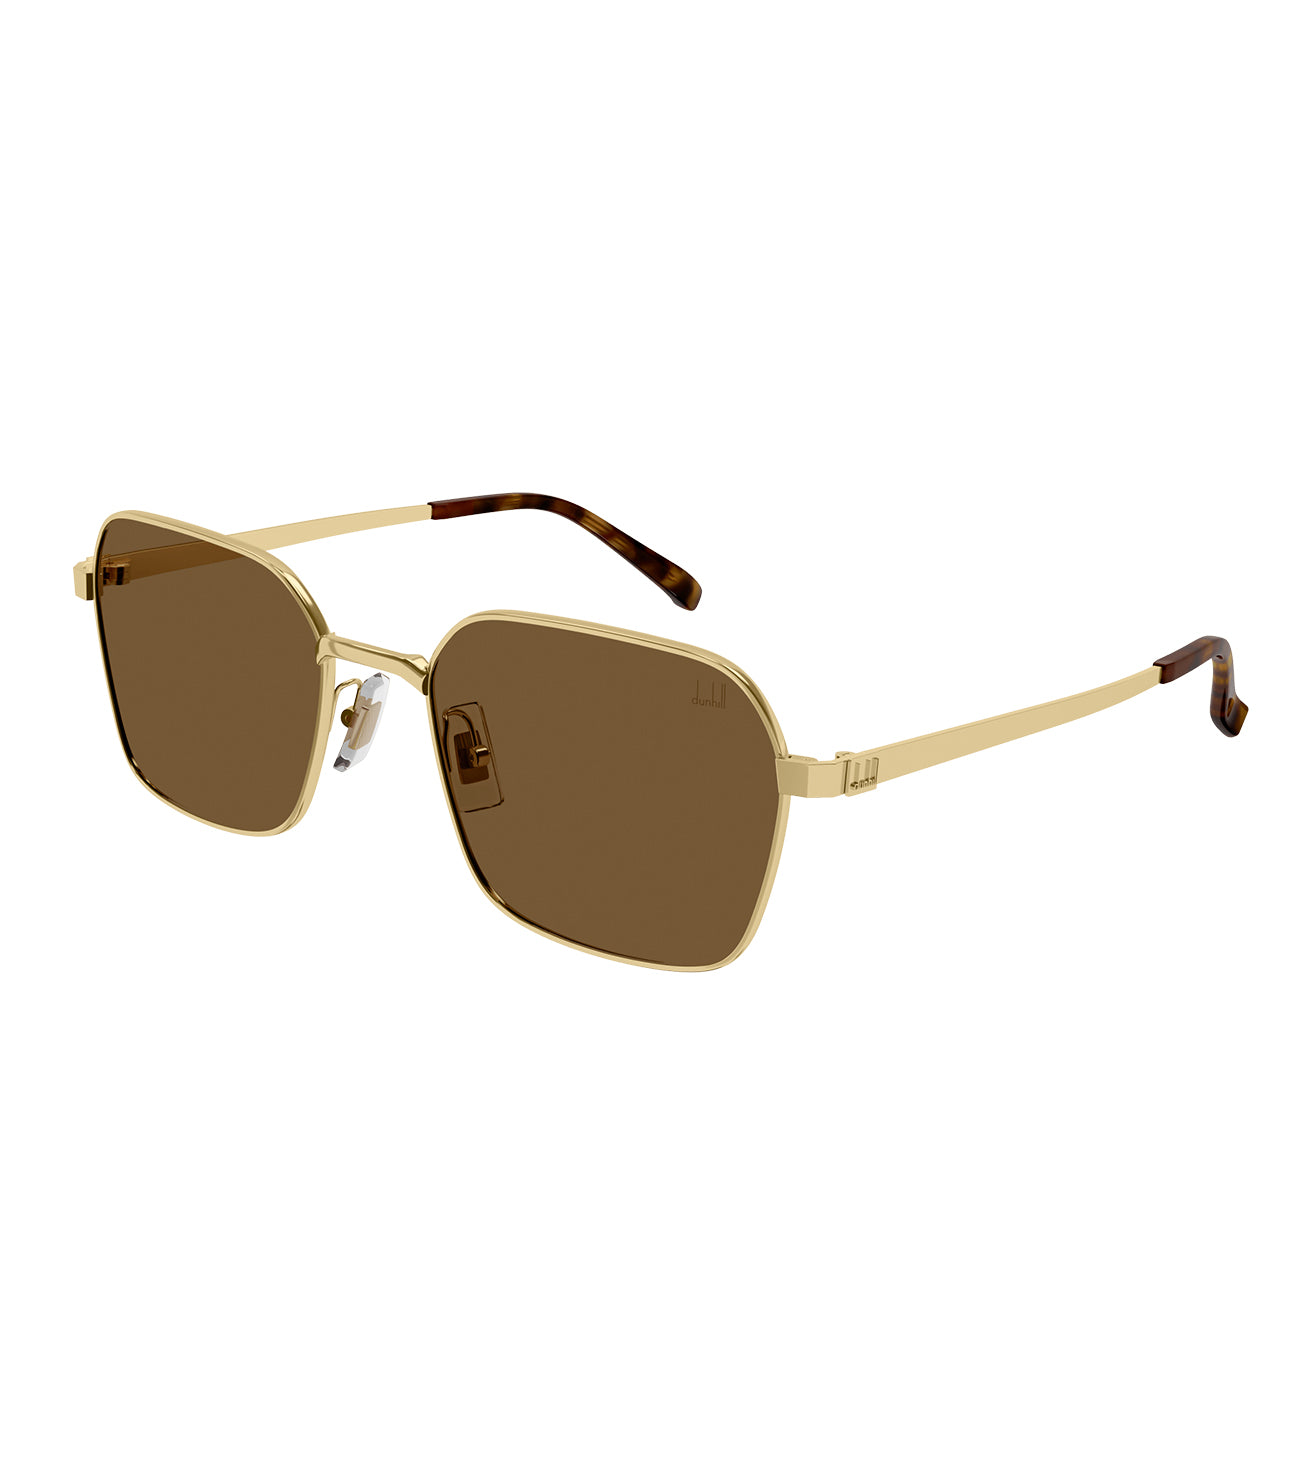 Dunhill Men's Brown Square Sunglass